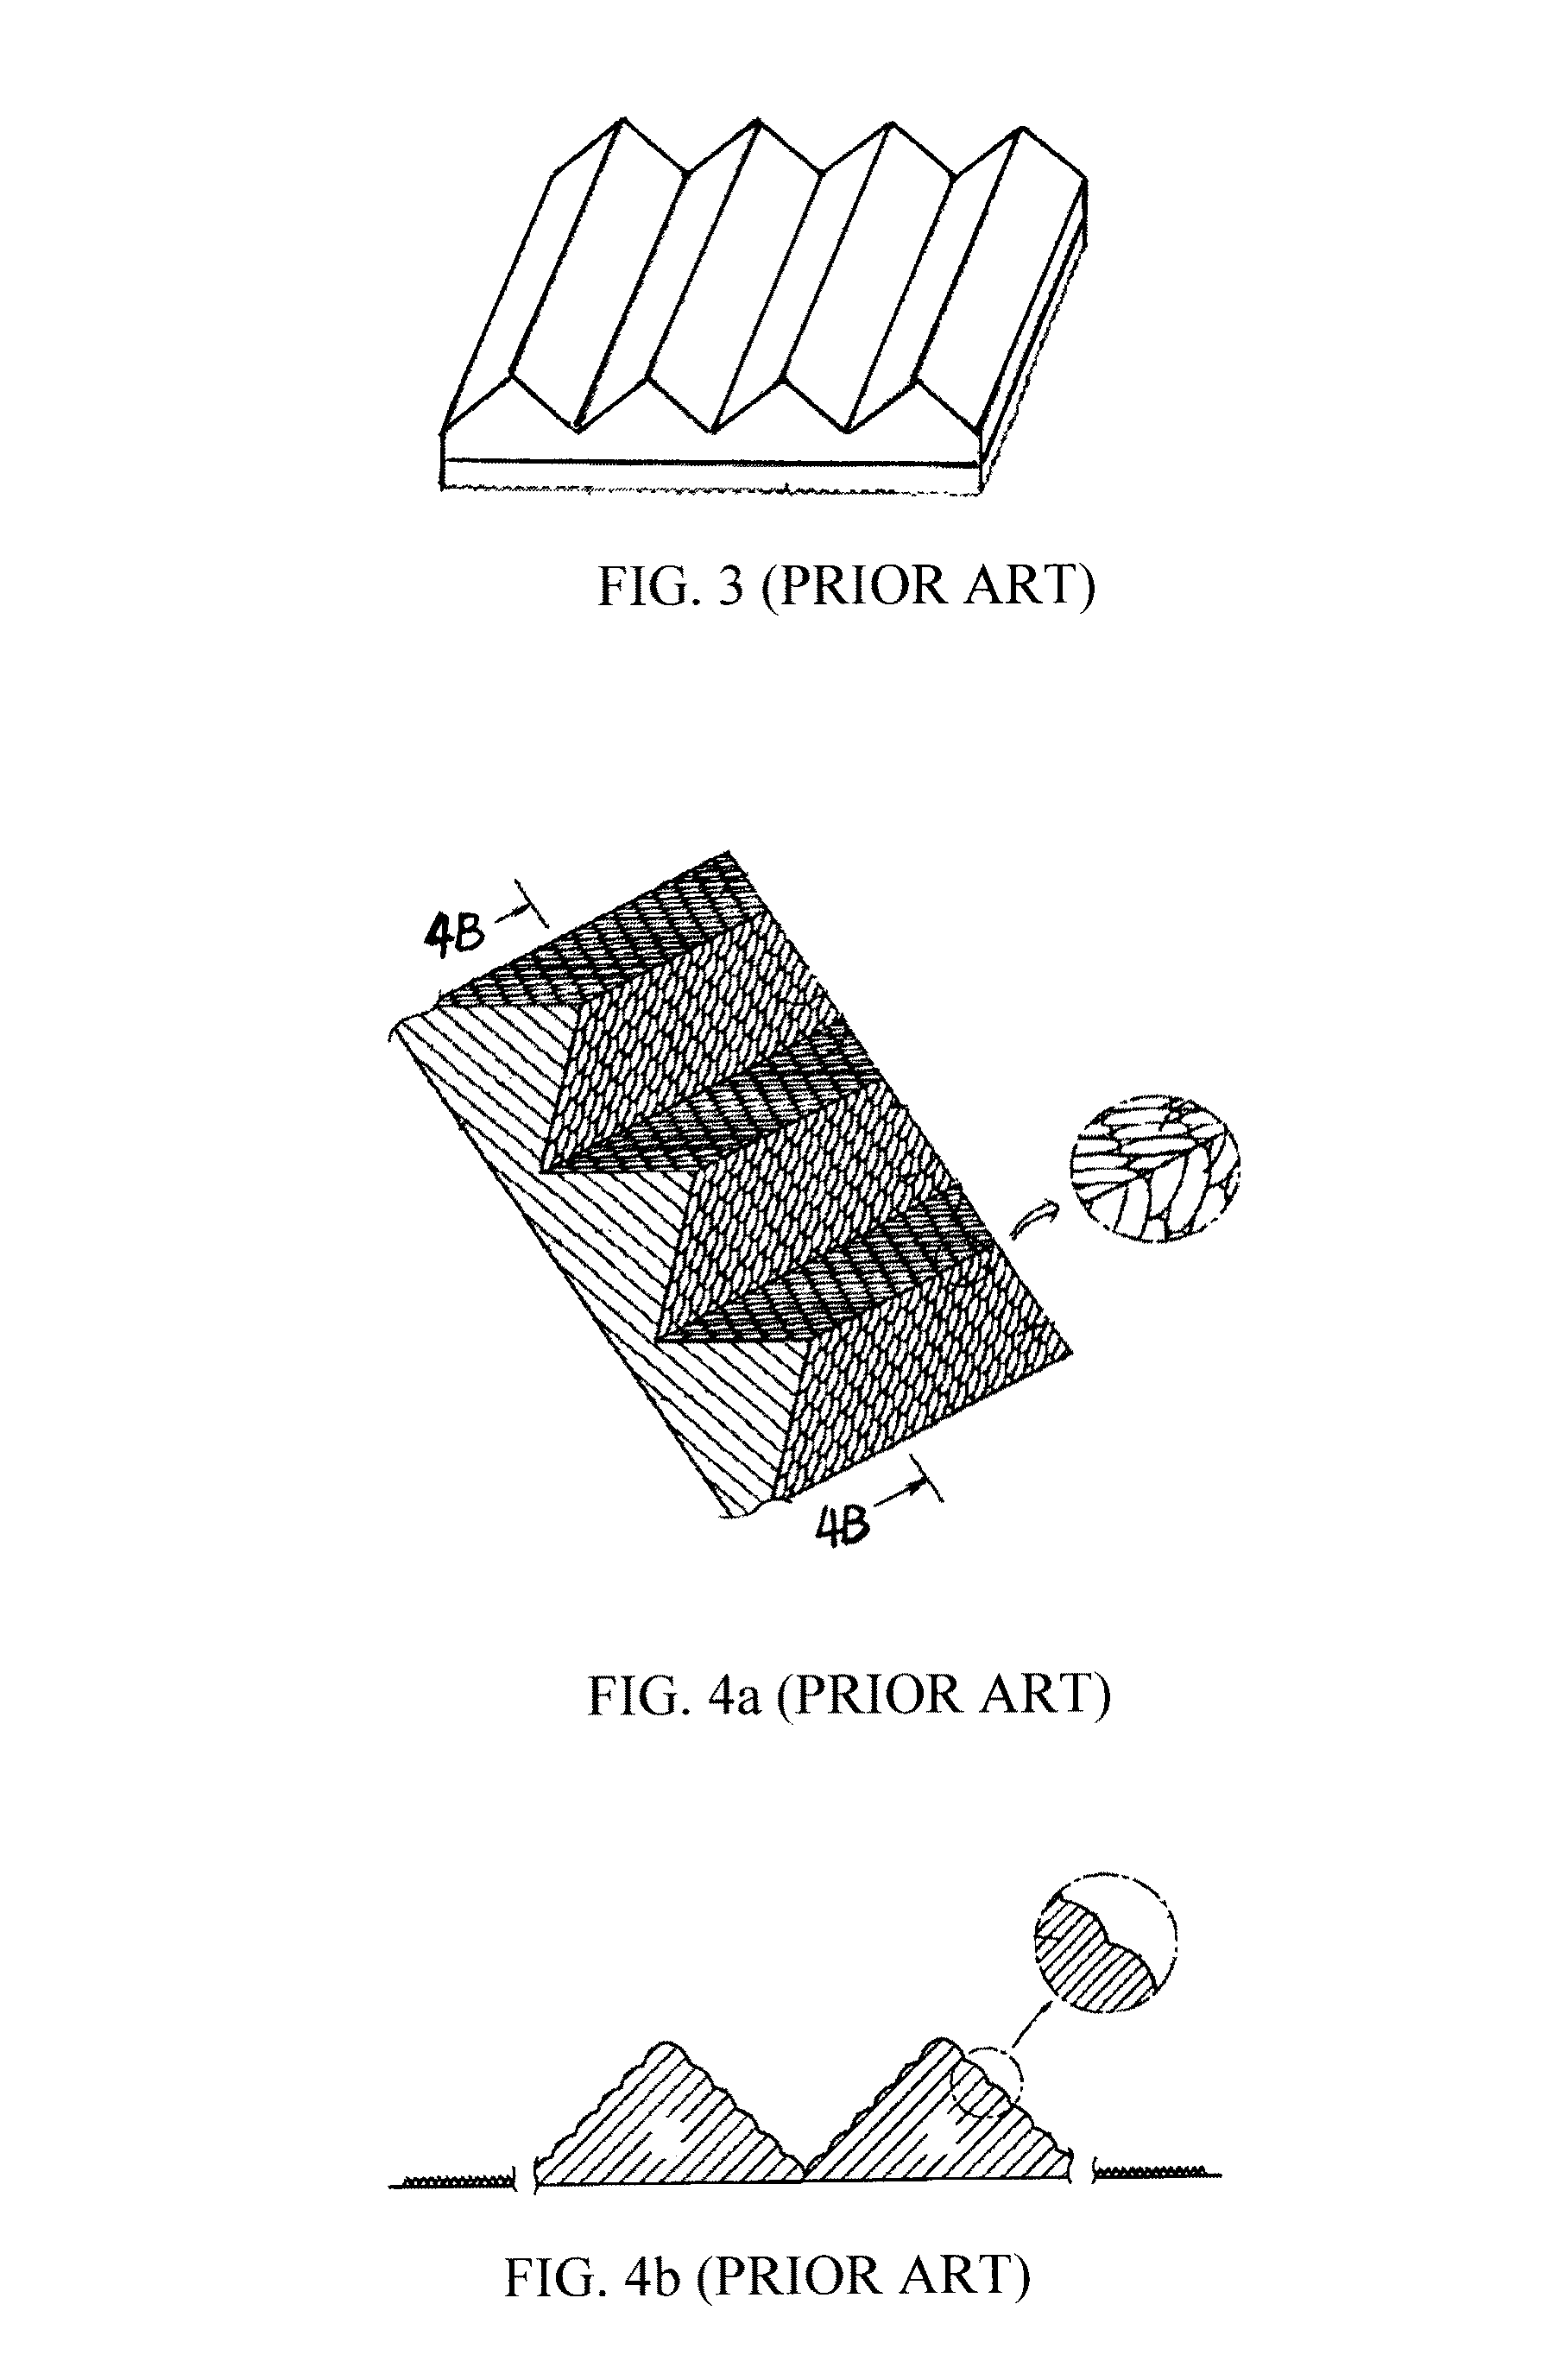 Optical substrates having light collimating and diffusion structures